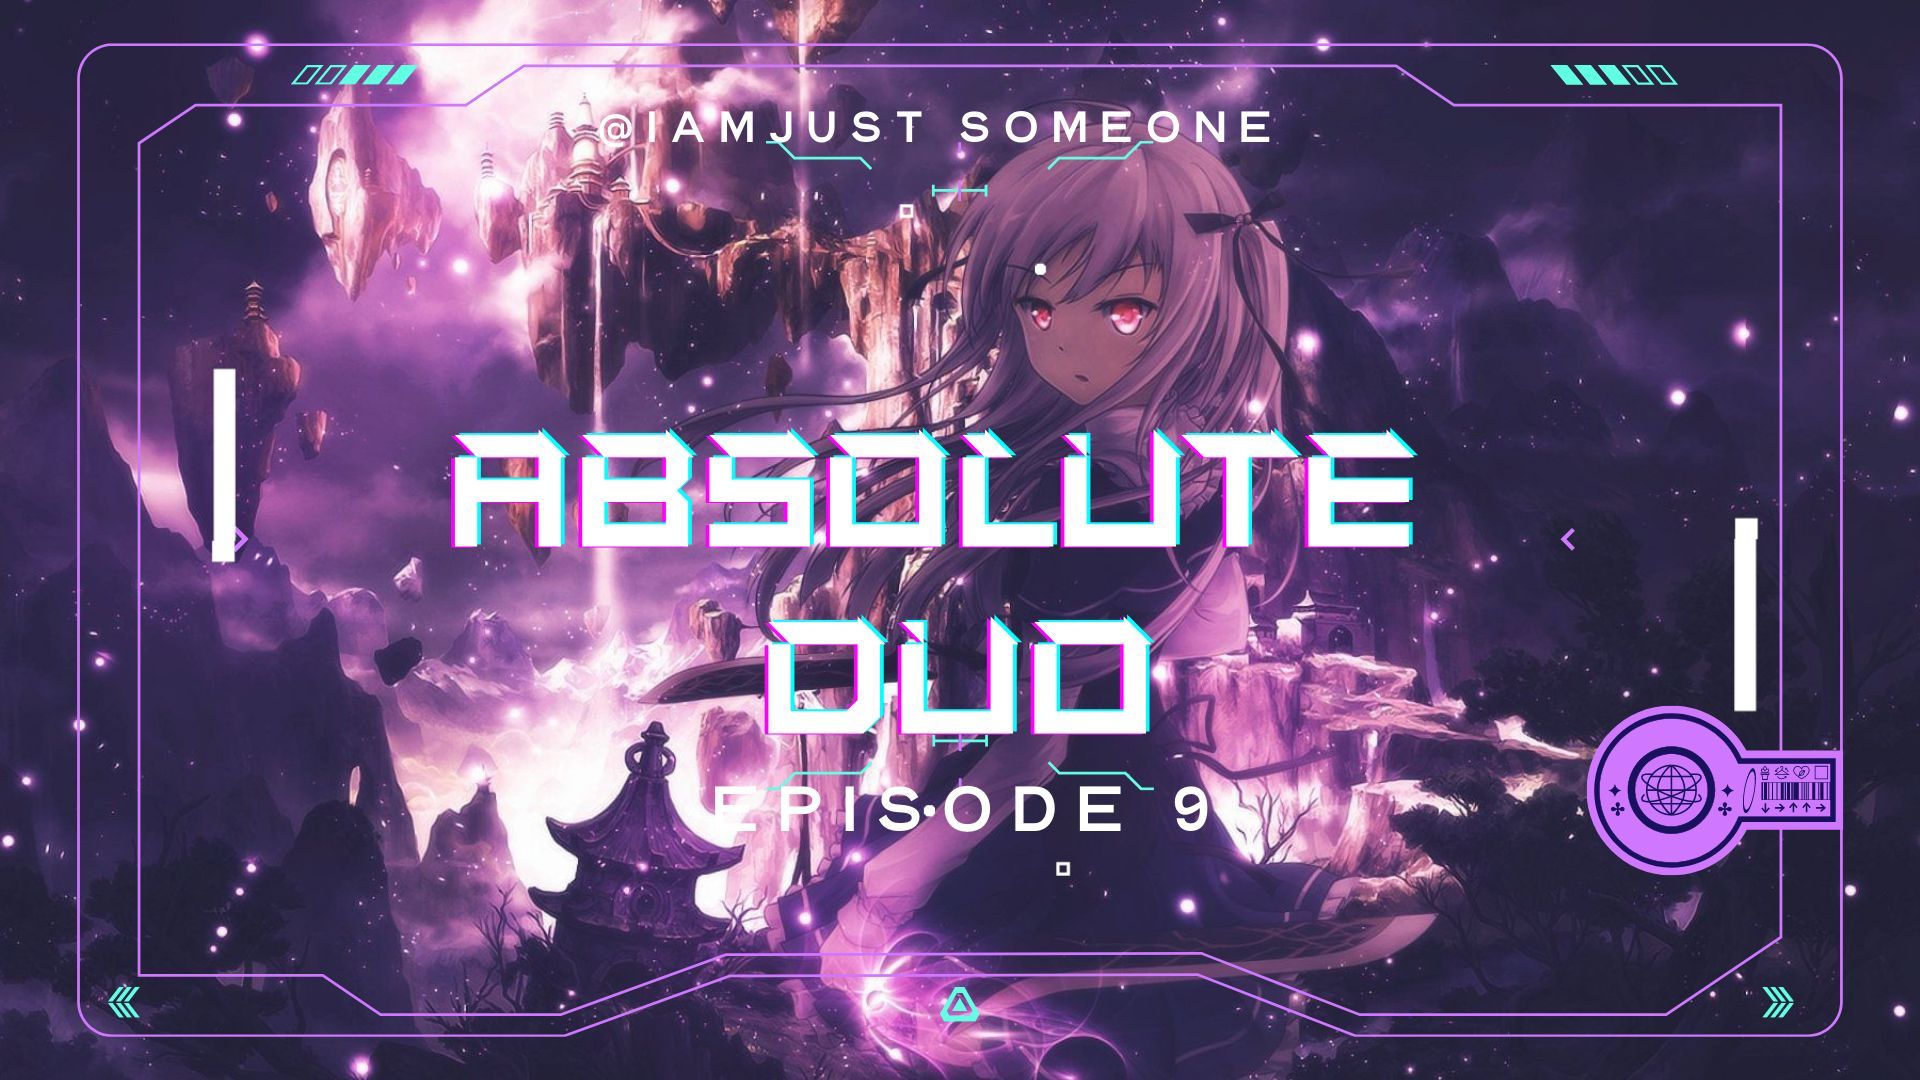 Assistir Absolute Duo Episodio 9 Online